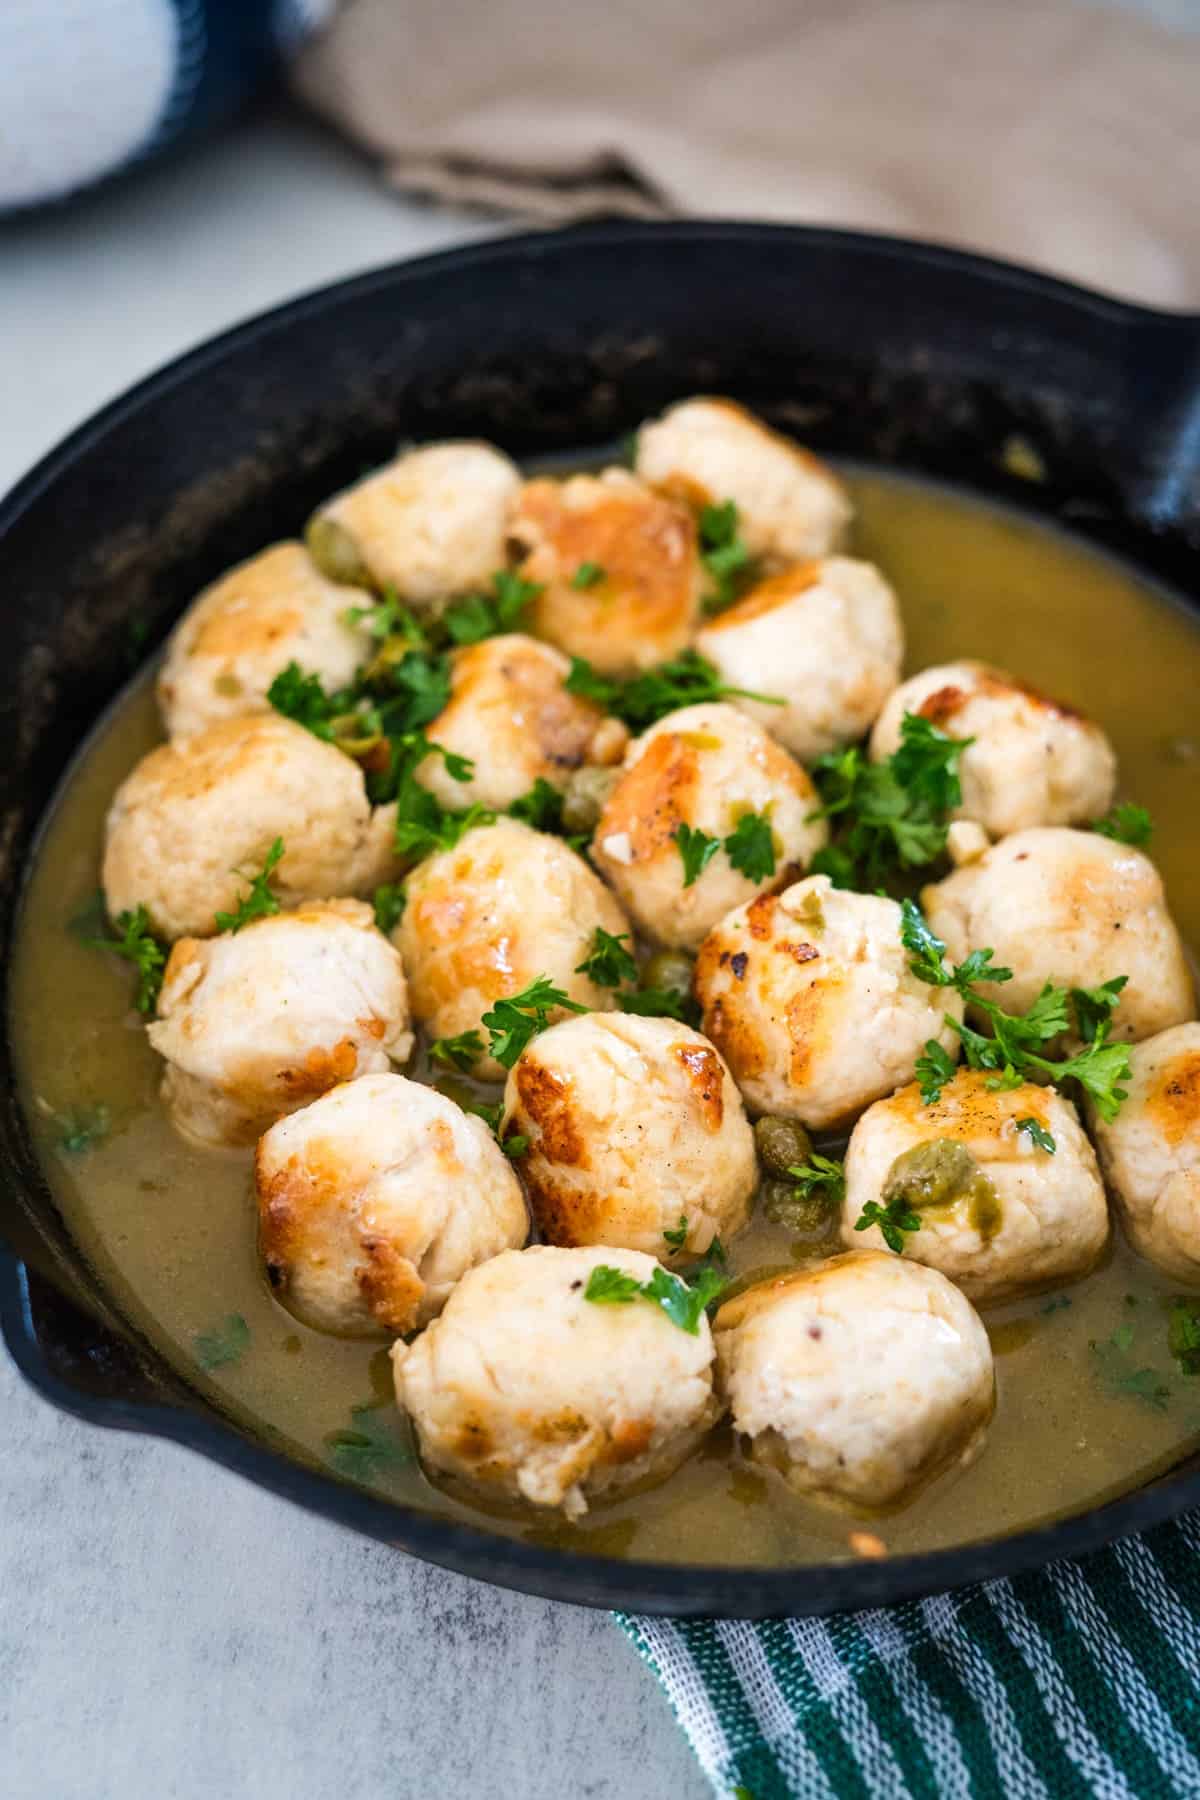 A skillet of chicken meatballs in a savory sauce, garnished with chopped parsley, served on a striped cloth.